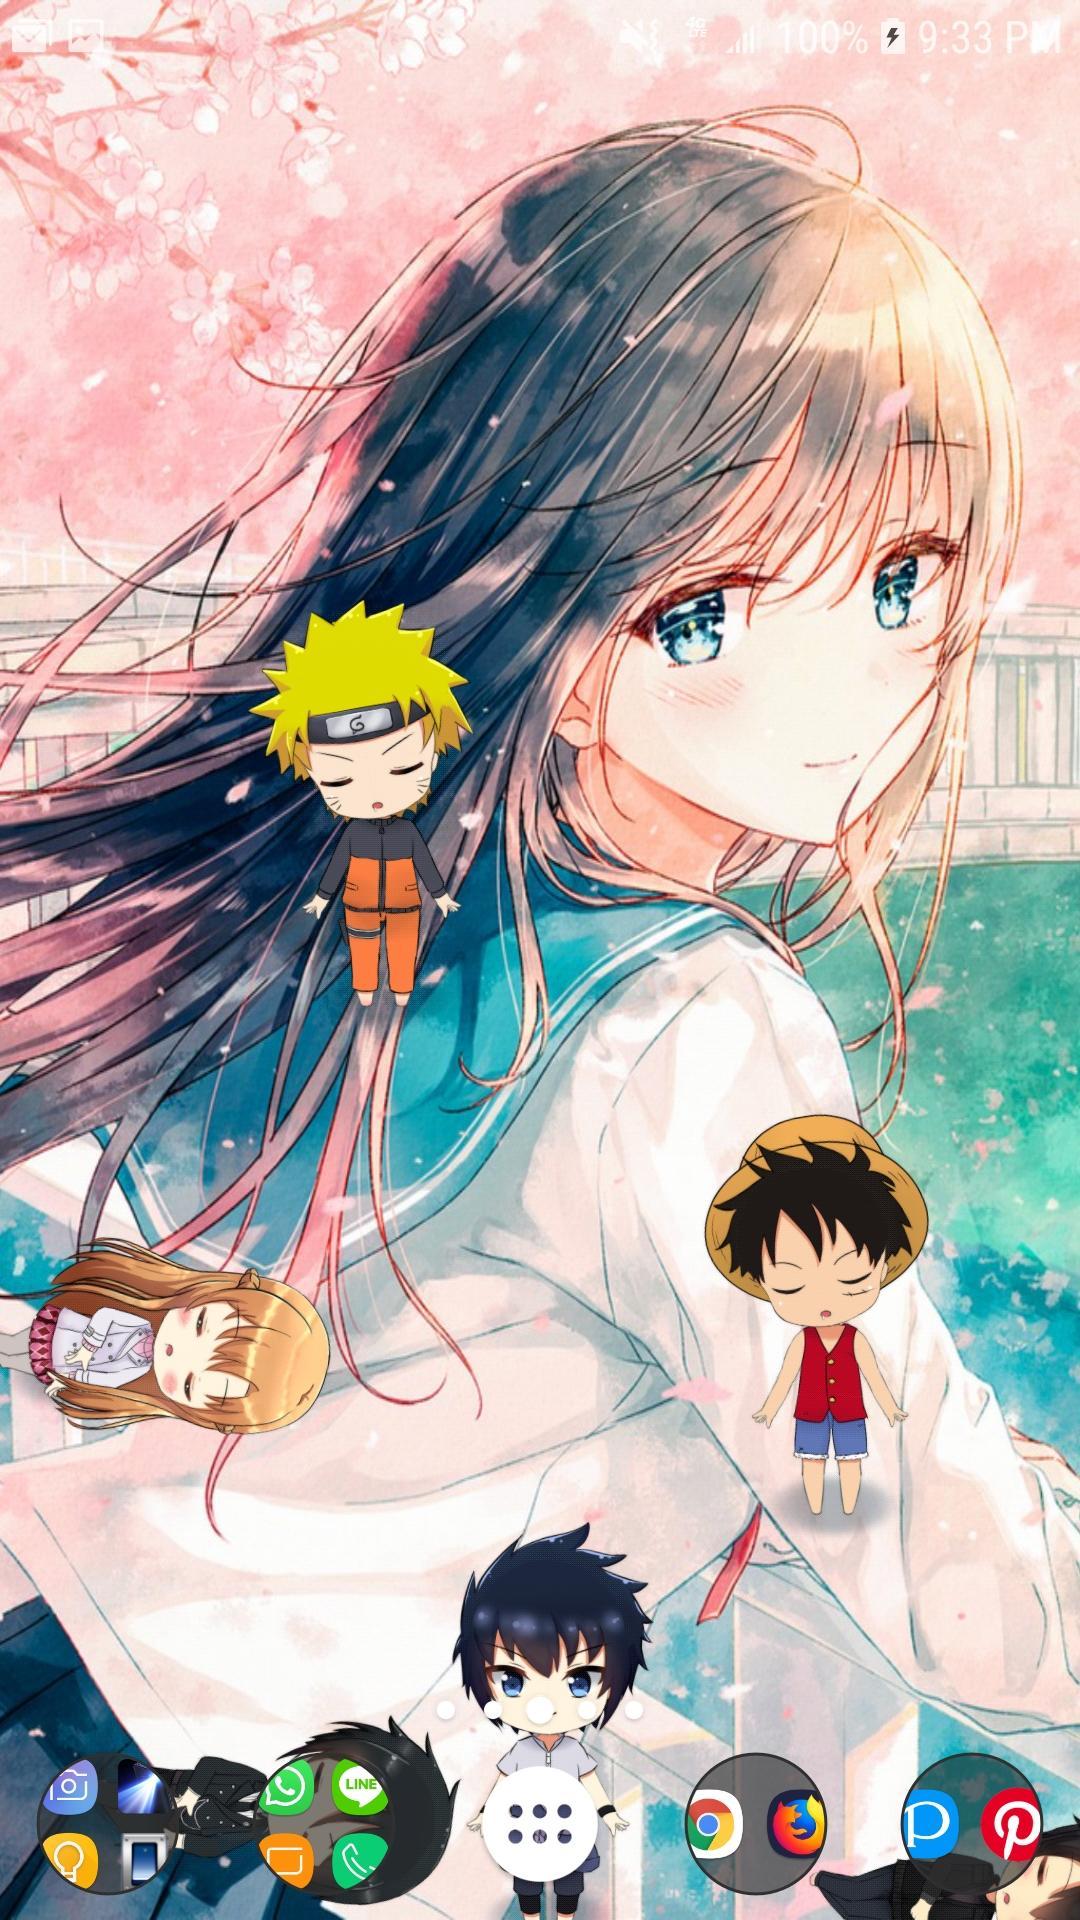 Lively Anime Live Wallpaper for Android - APK Download